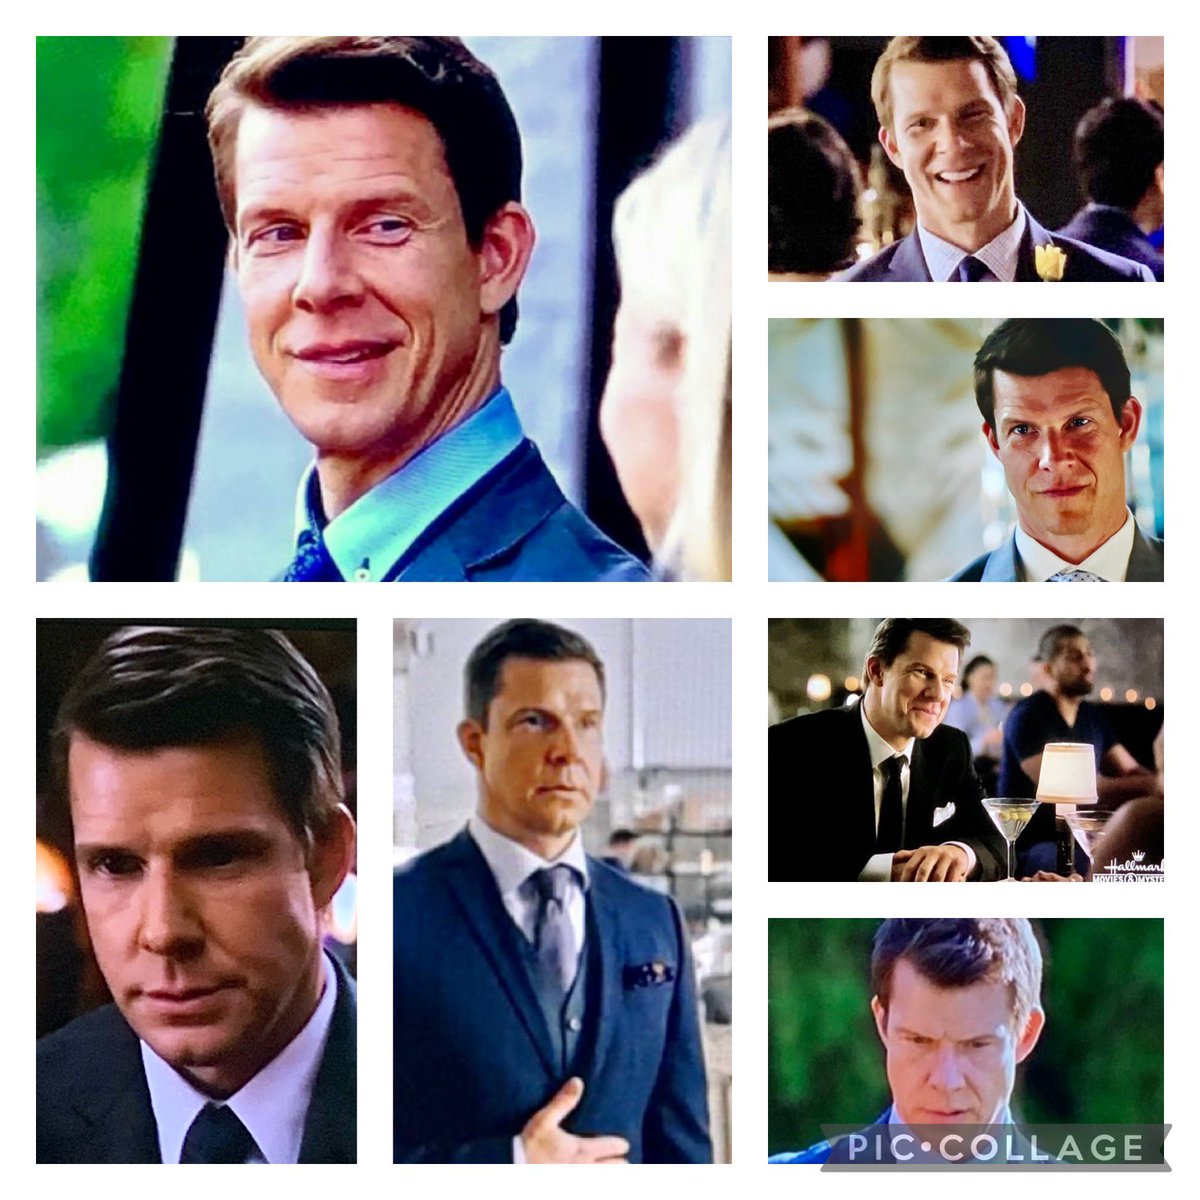 The #POstables have been on quite a journey with Oliver. He’s gone through a lot of pain and soul searching but the one bright light in all of it has been Shane. I can’t wait to see where @MarthaMoonWater and @Eric_Mabius are going to take him next. Please #RenewSSD today 💌